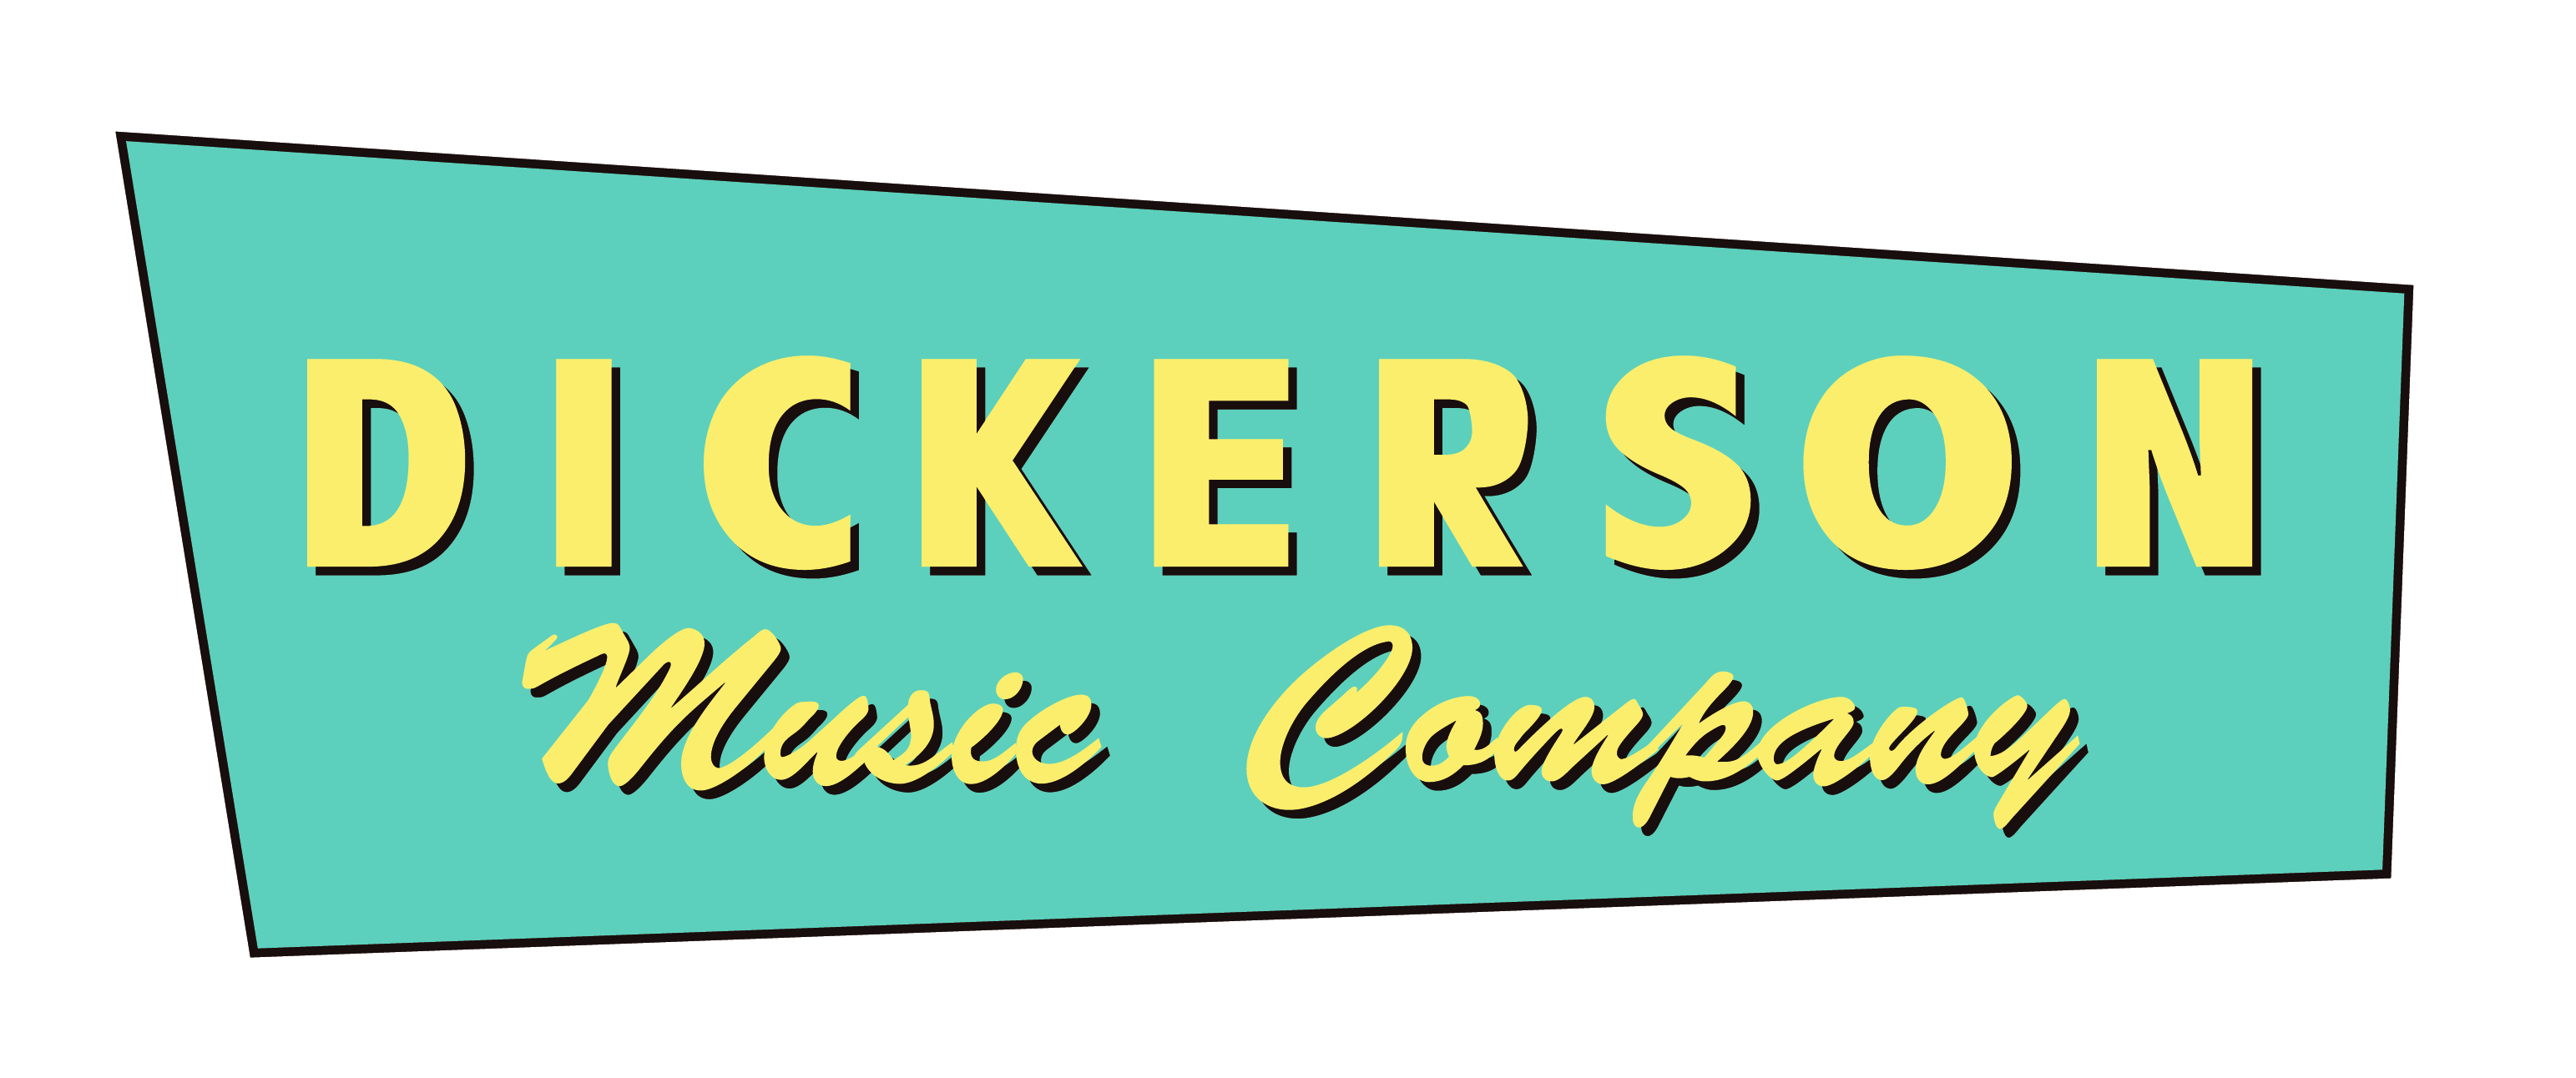 Logo of Dickerson Music Co